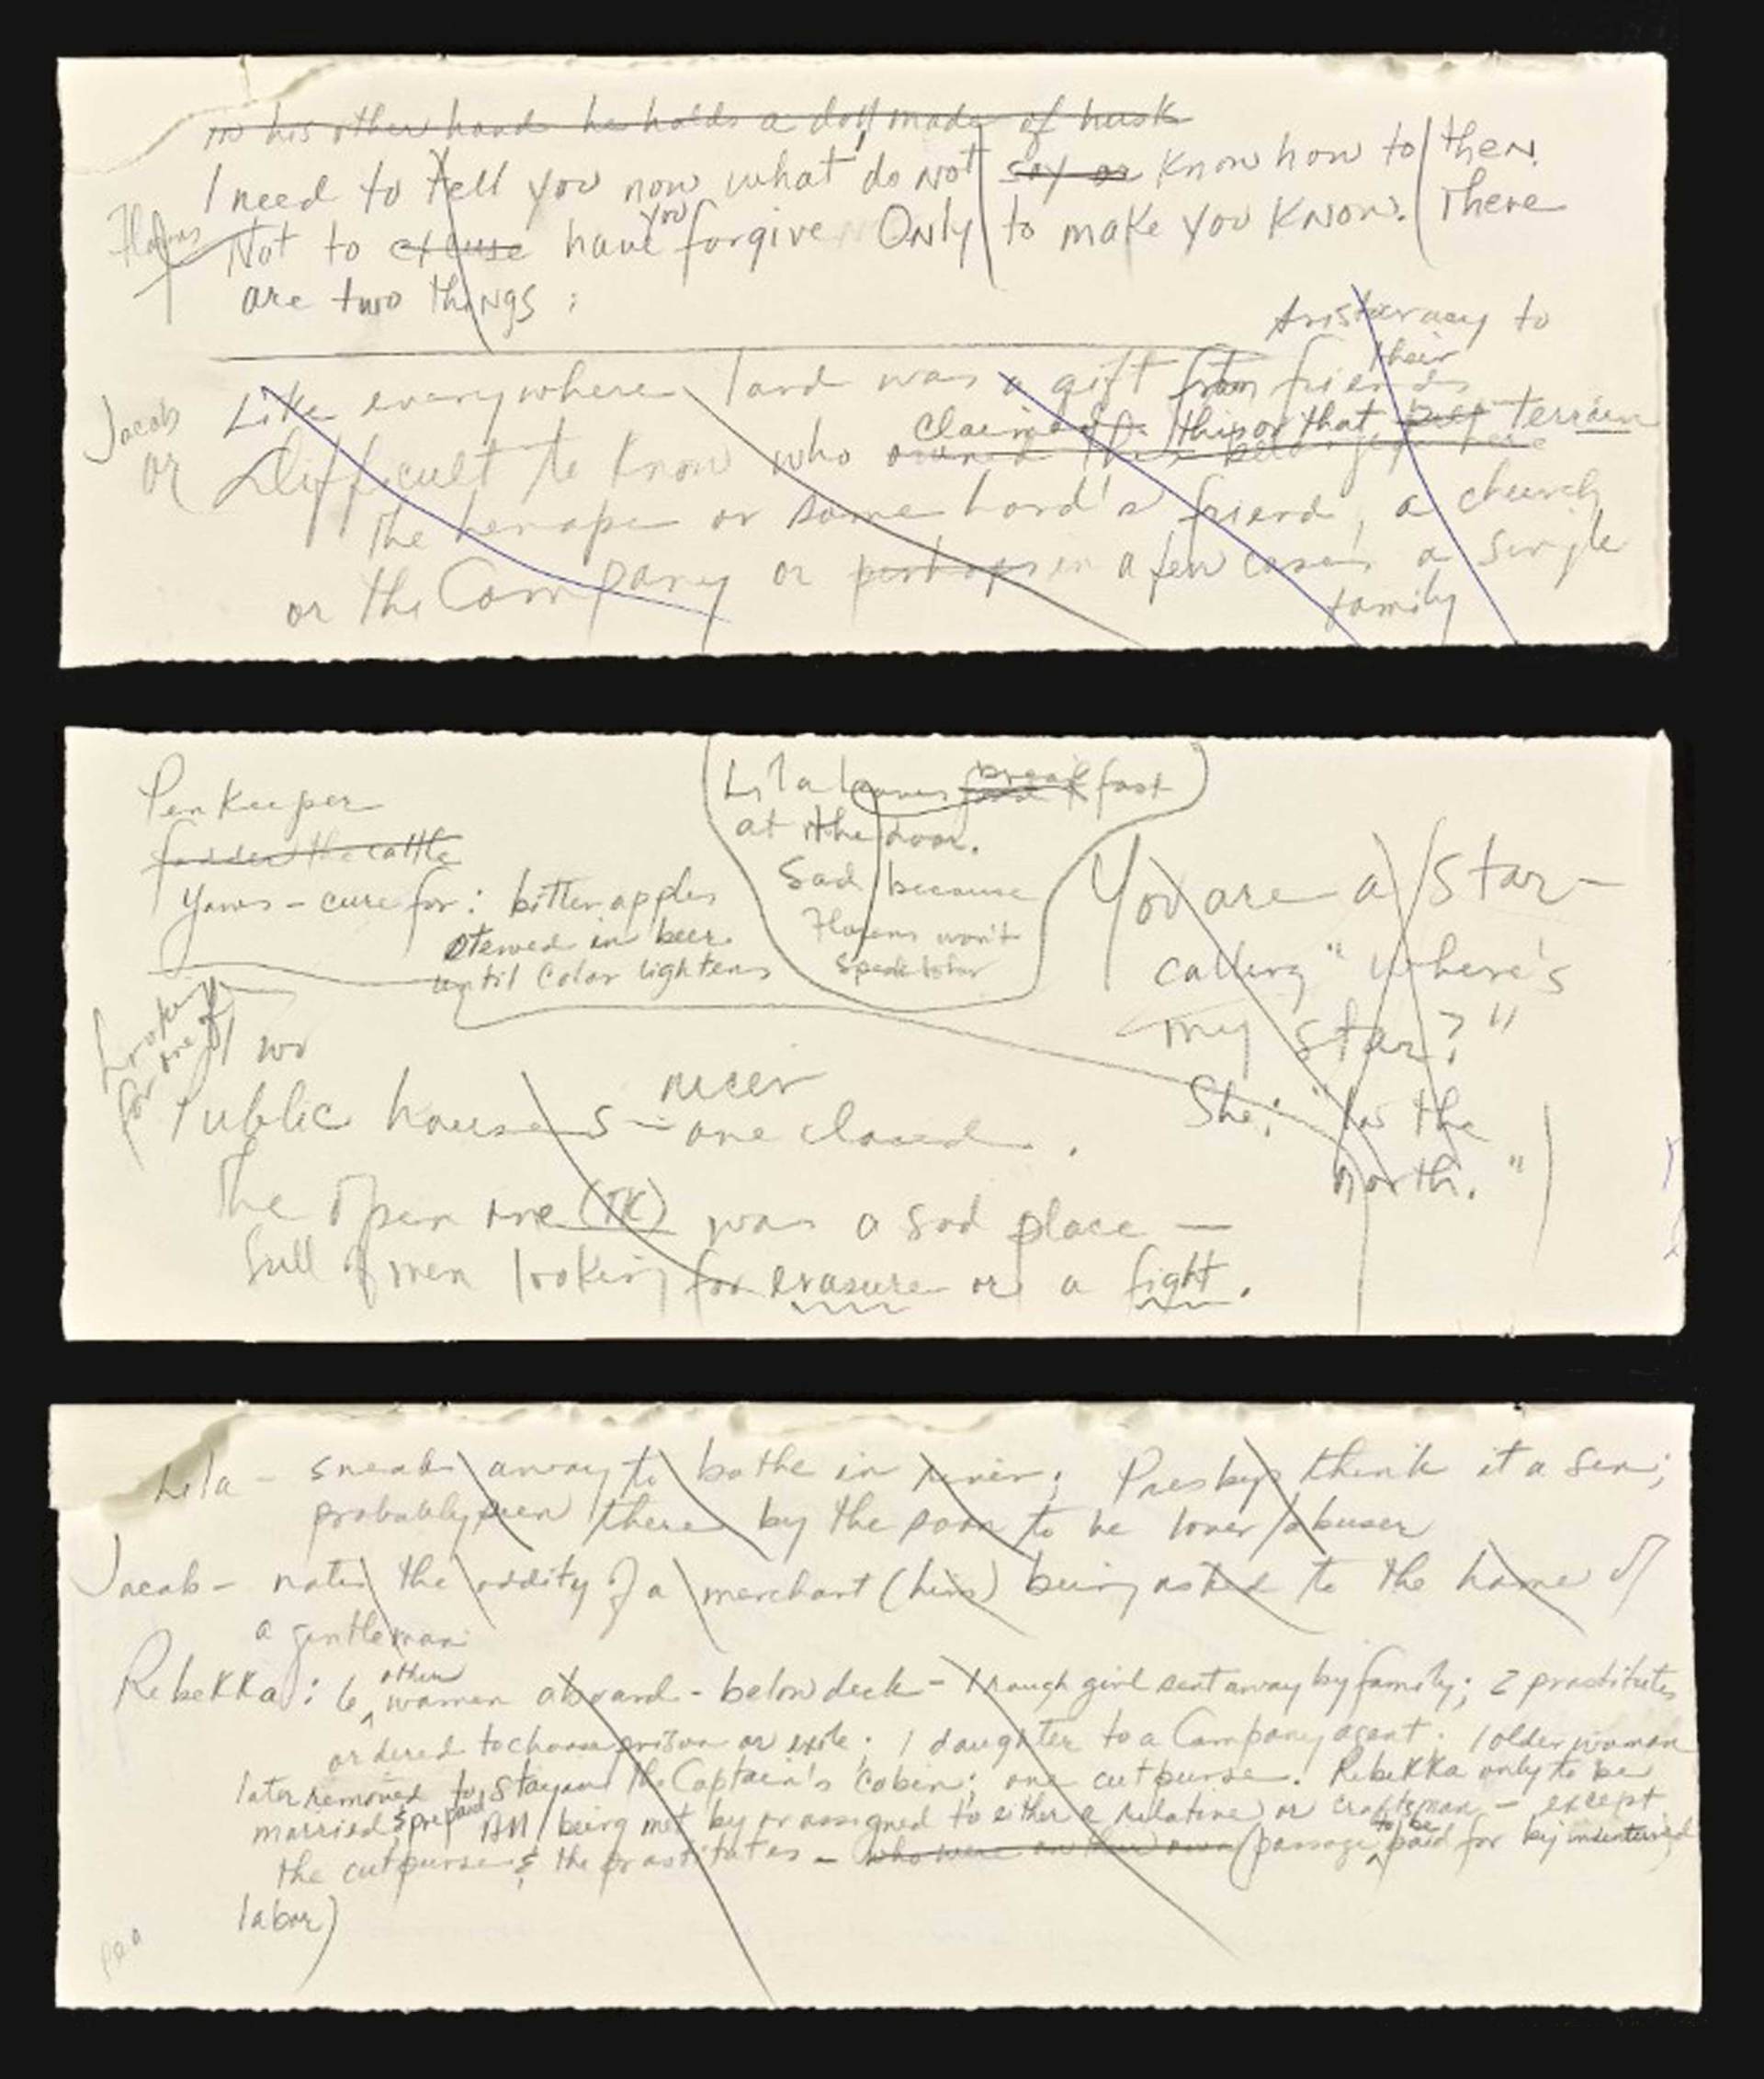 Toni Morrison's handwriting and revisions